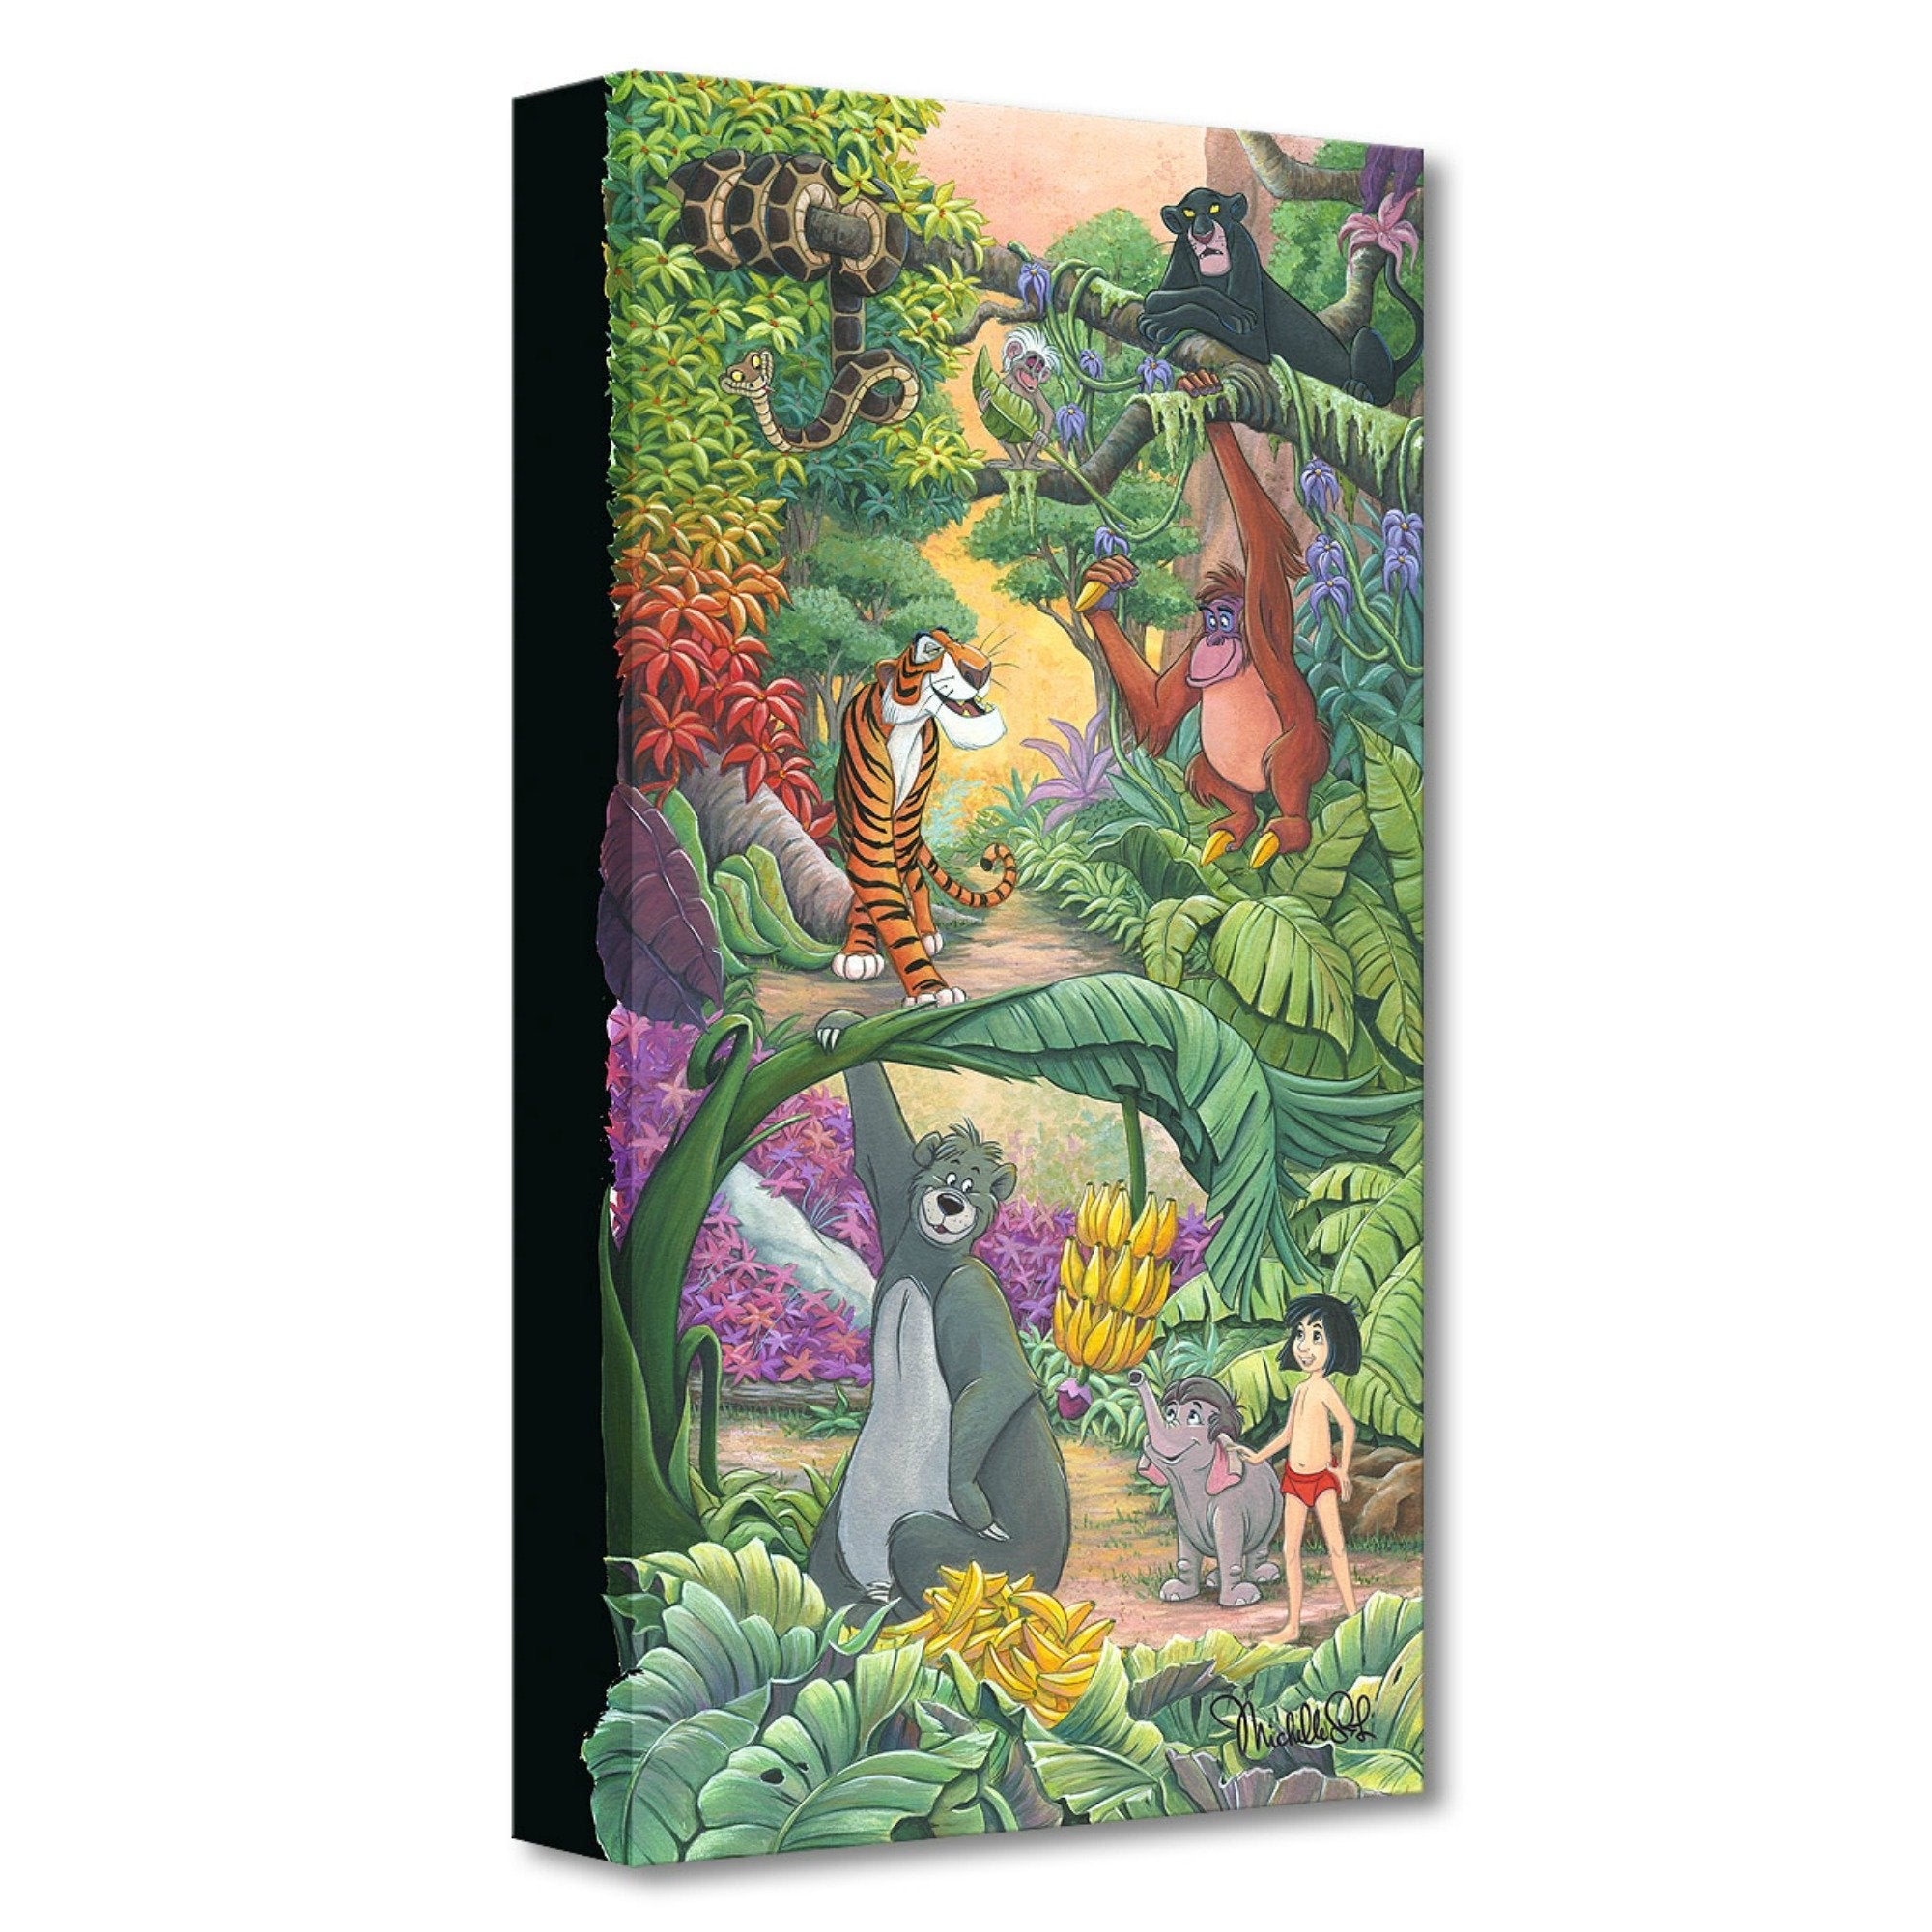 Home in the Jungle by Michelle St. Laurent.  Mowgli and Baloo help baby elephant Hathi Jr. by lowering down the hanging cluster of bananas from the bananas tree.